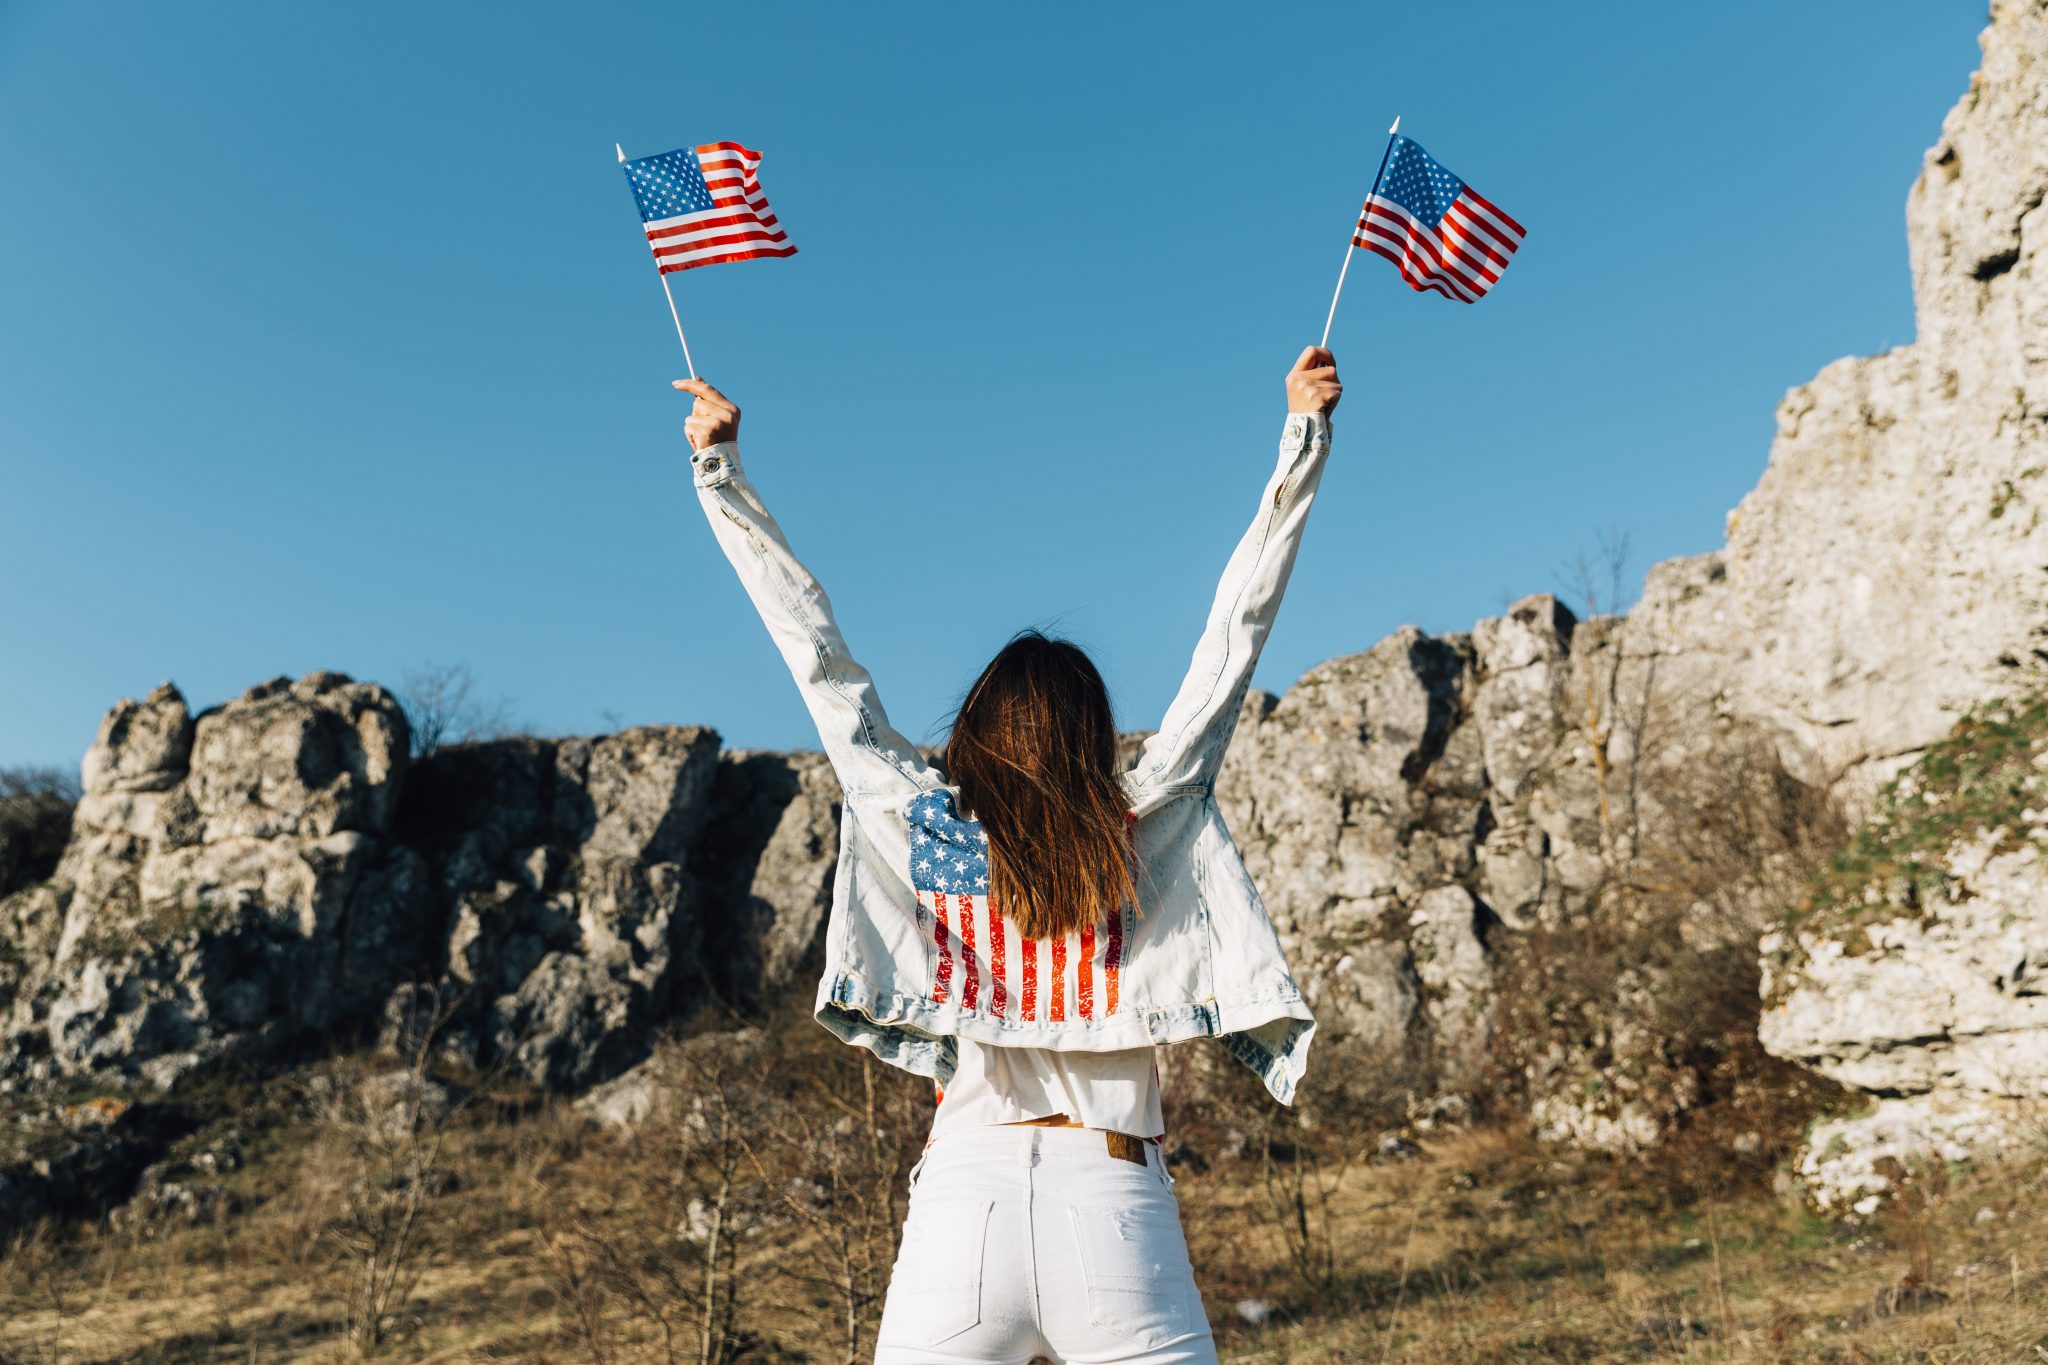 Things You Should Know Before Traveling to the United States